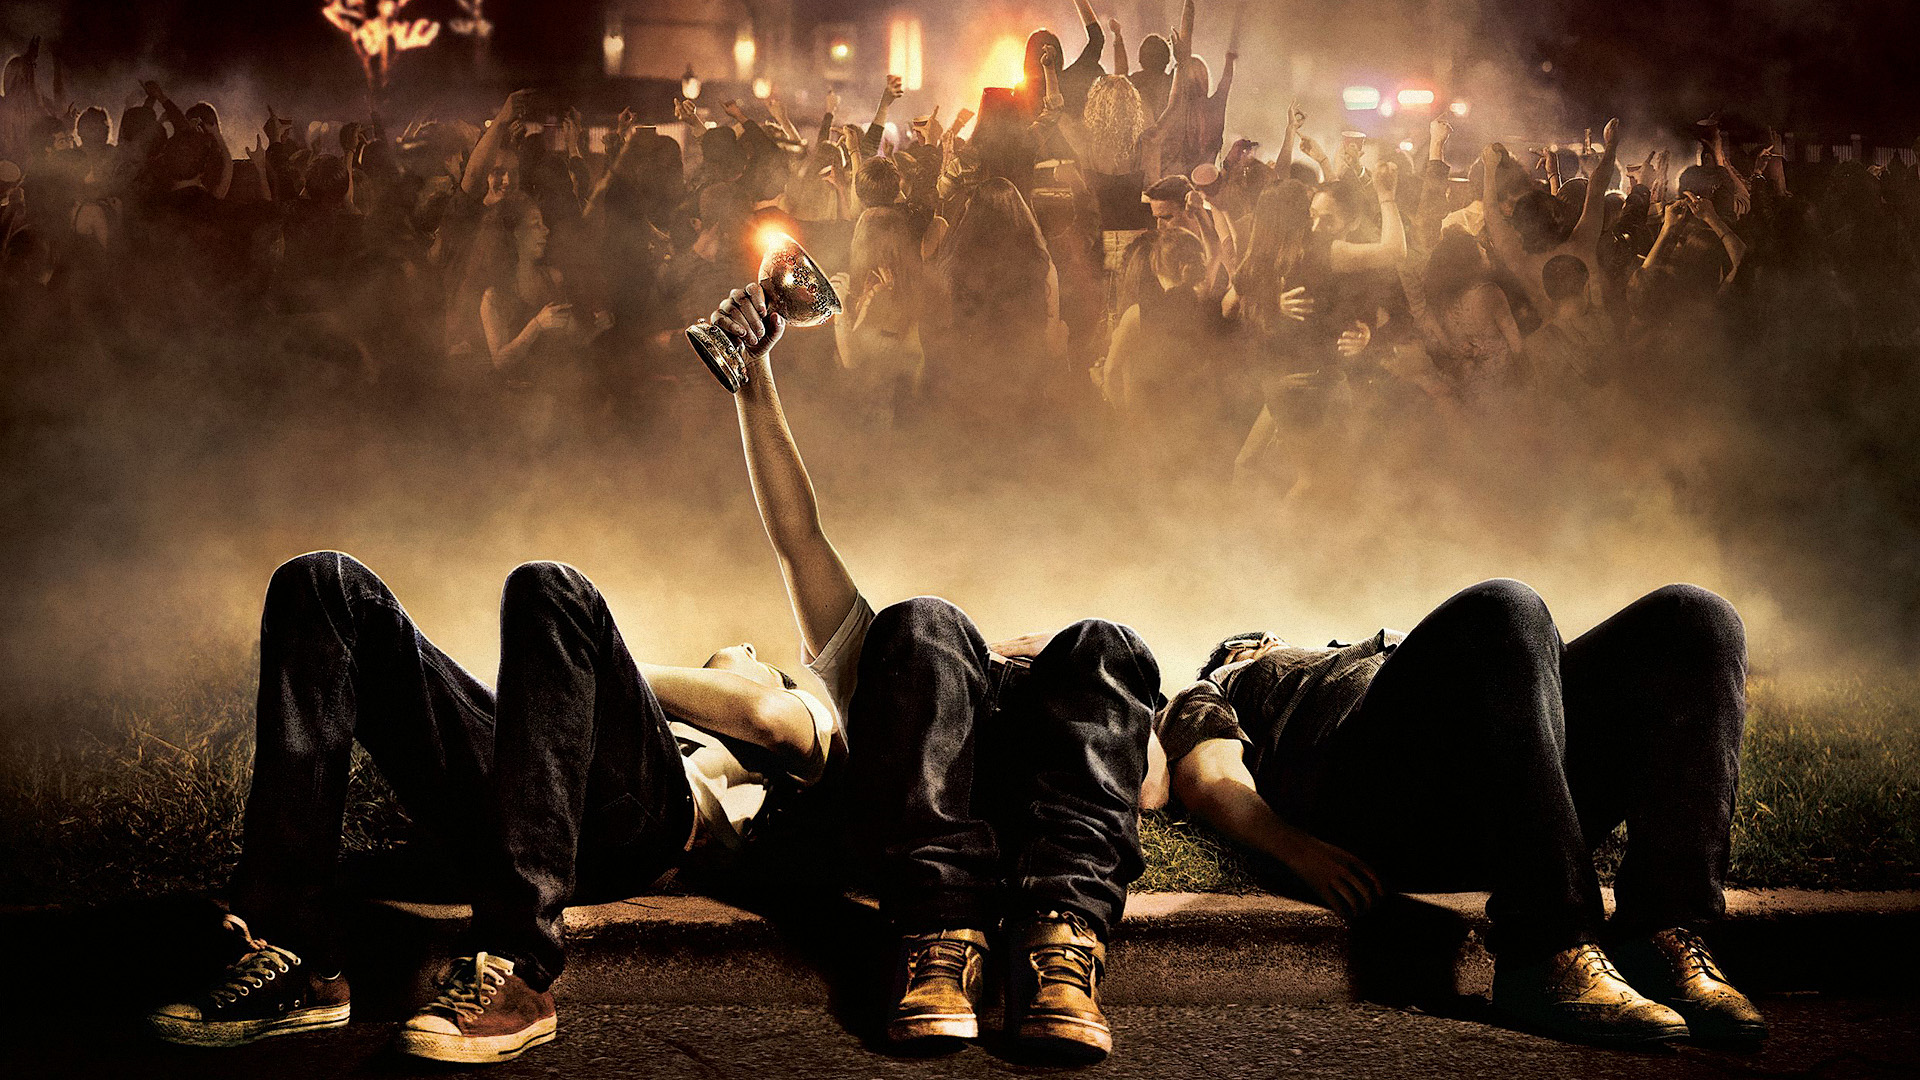 Project X Party Wallpaper